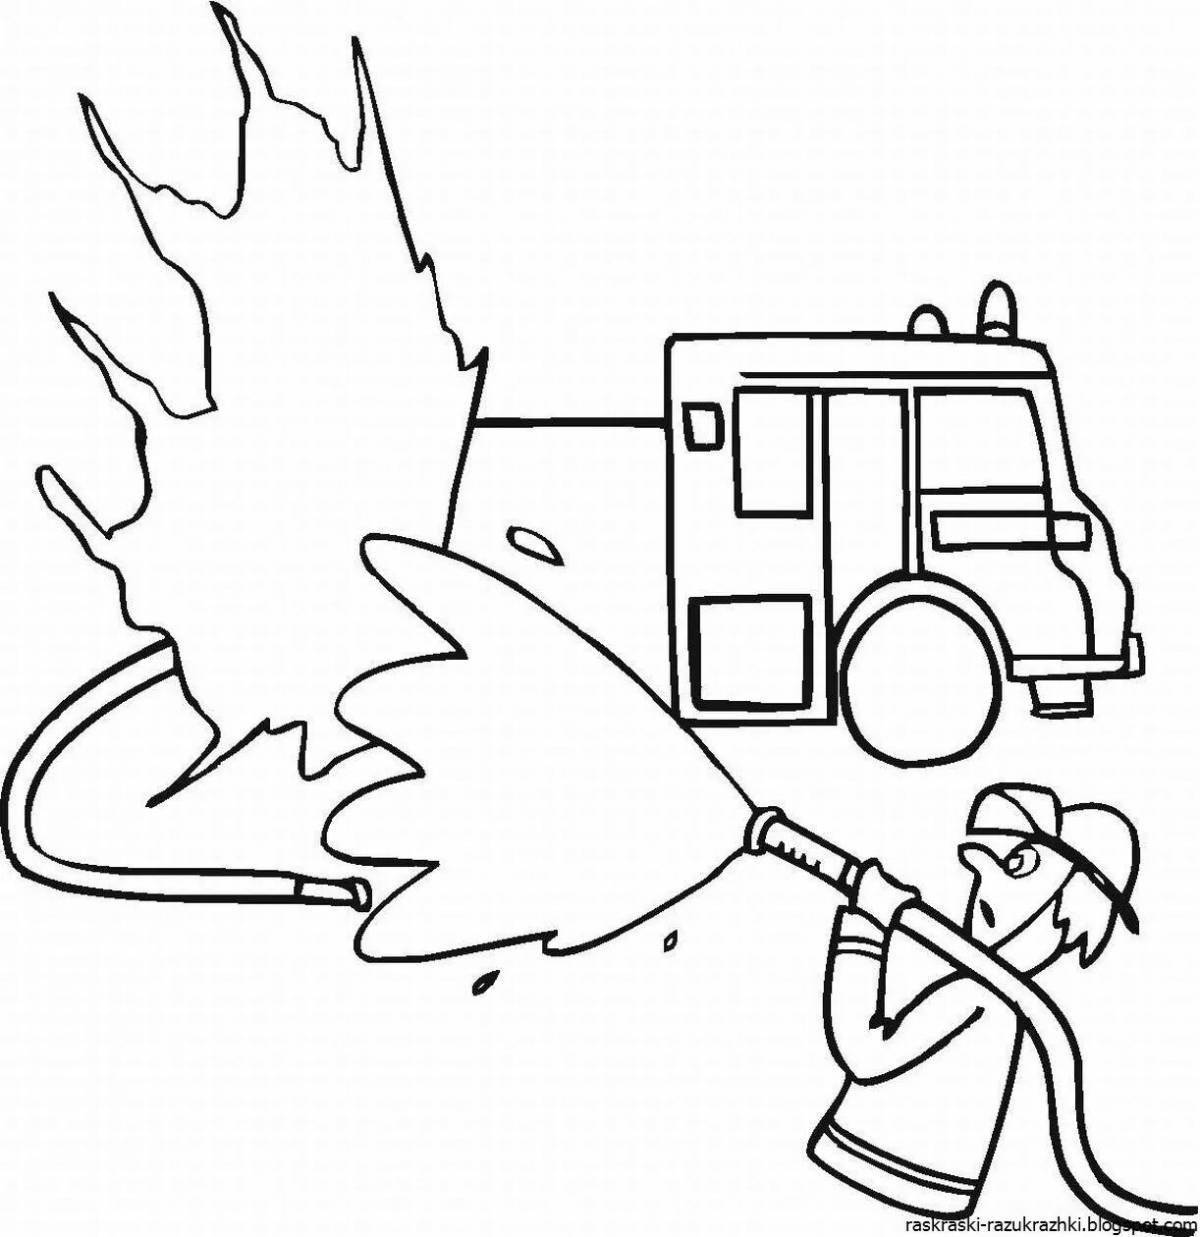 Kindergarten fire safety bright coloring book